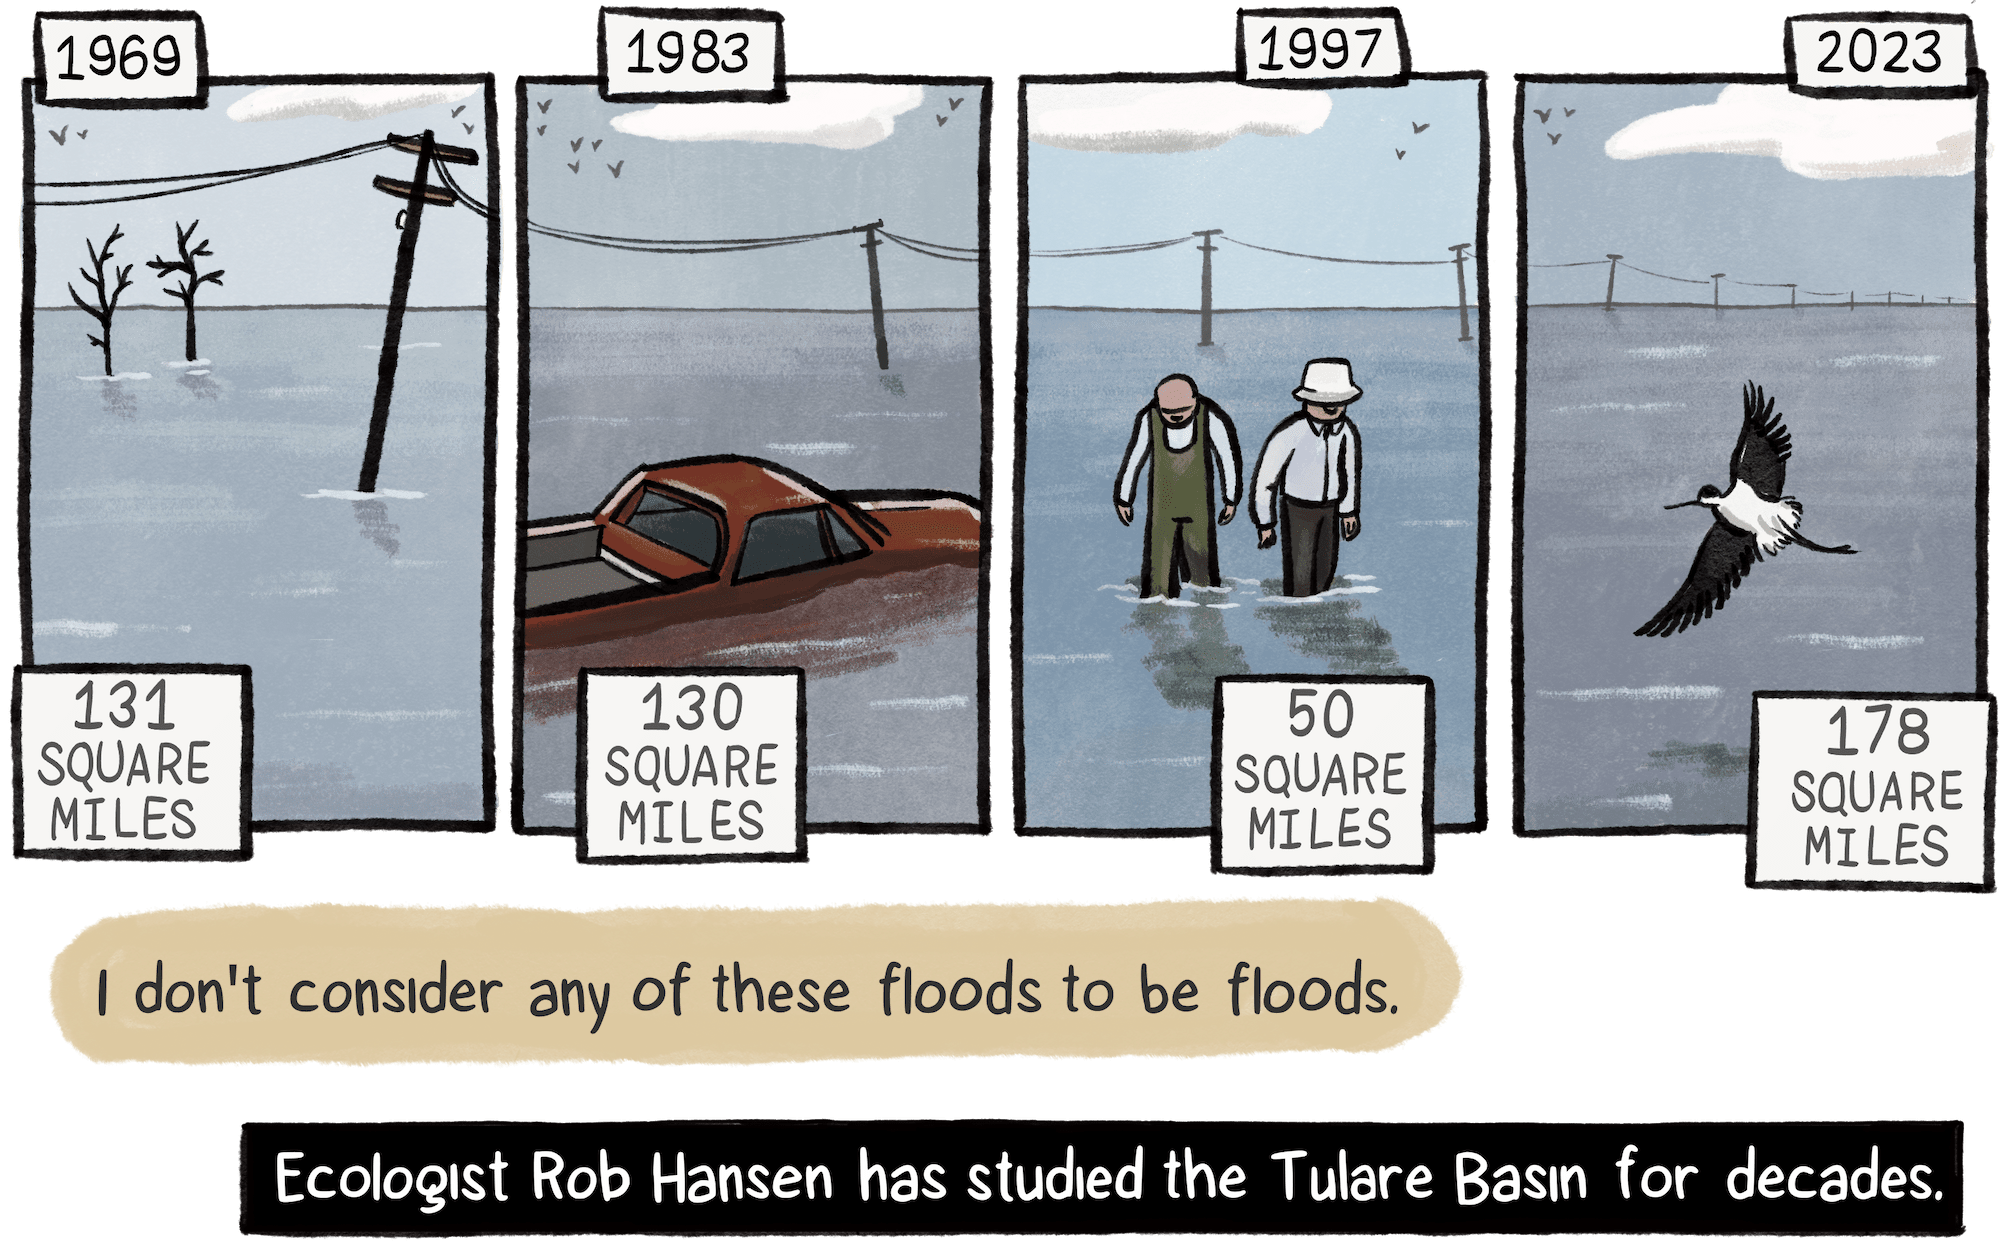 A series of flooding scenes, depicting floods and the square miles they covered, including 131 square miles in 1969, 130 in 1983, 50 in 1997 and 178 in 2023. An unseen ecologist named Rob Hansen says, “I don’t consider any of these floods to be floods.”